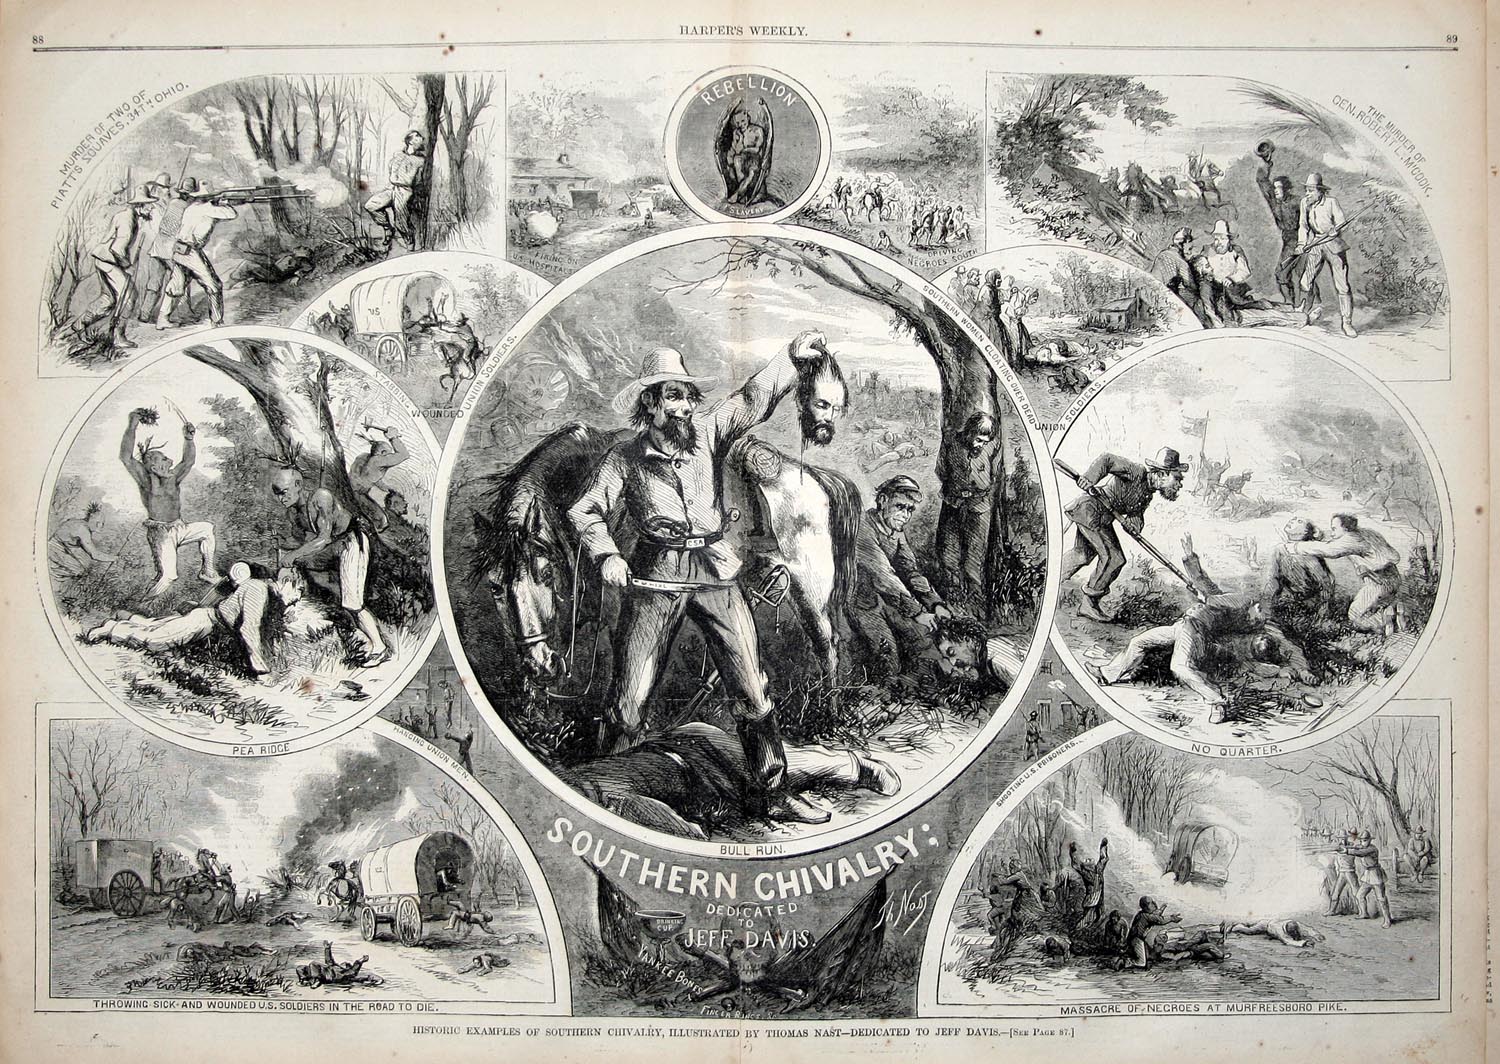 Historic Examples of Southern Chivalry, Illustrated by Thomas Nast- Dedicated to Jeff Davis( Южное рыцарство )